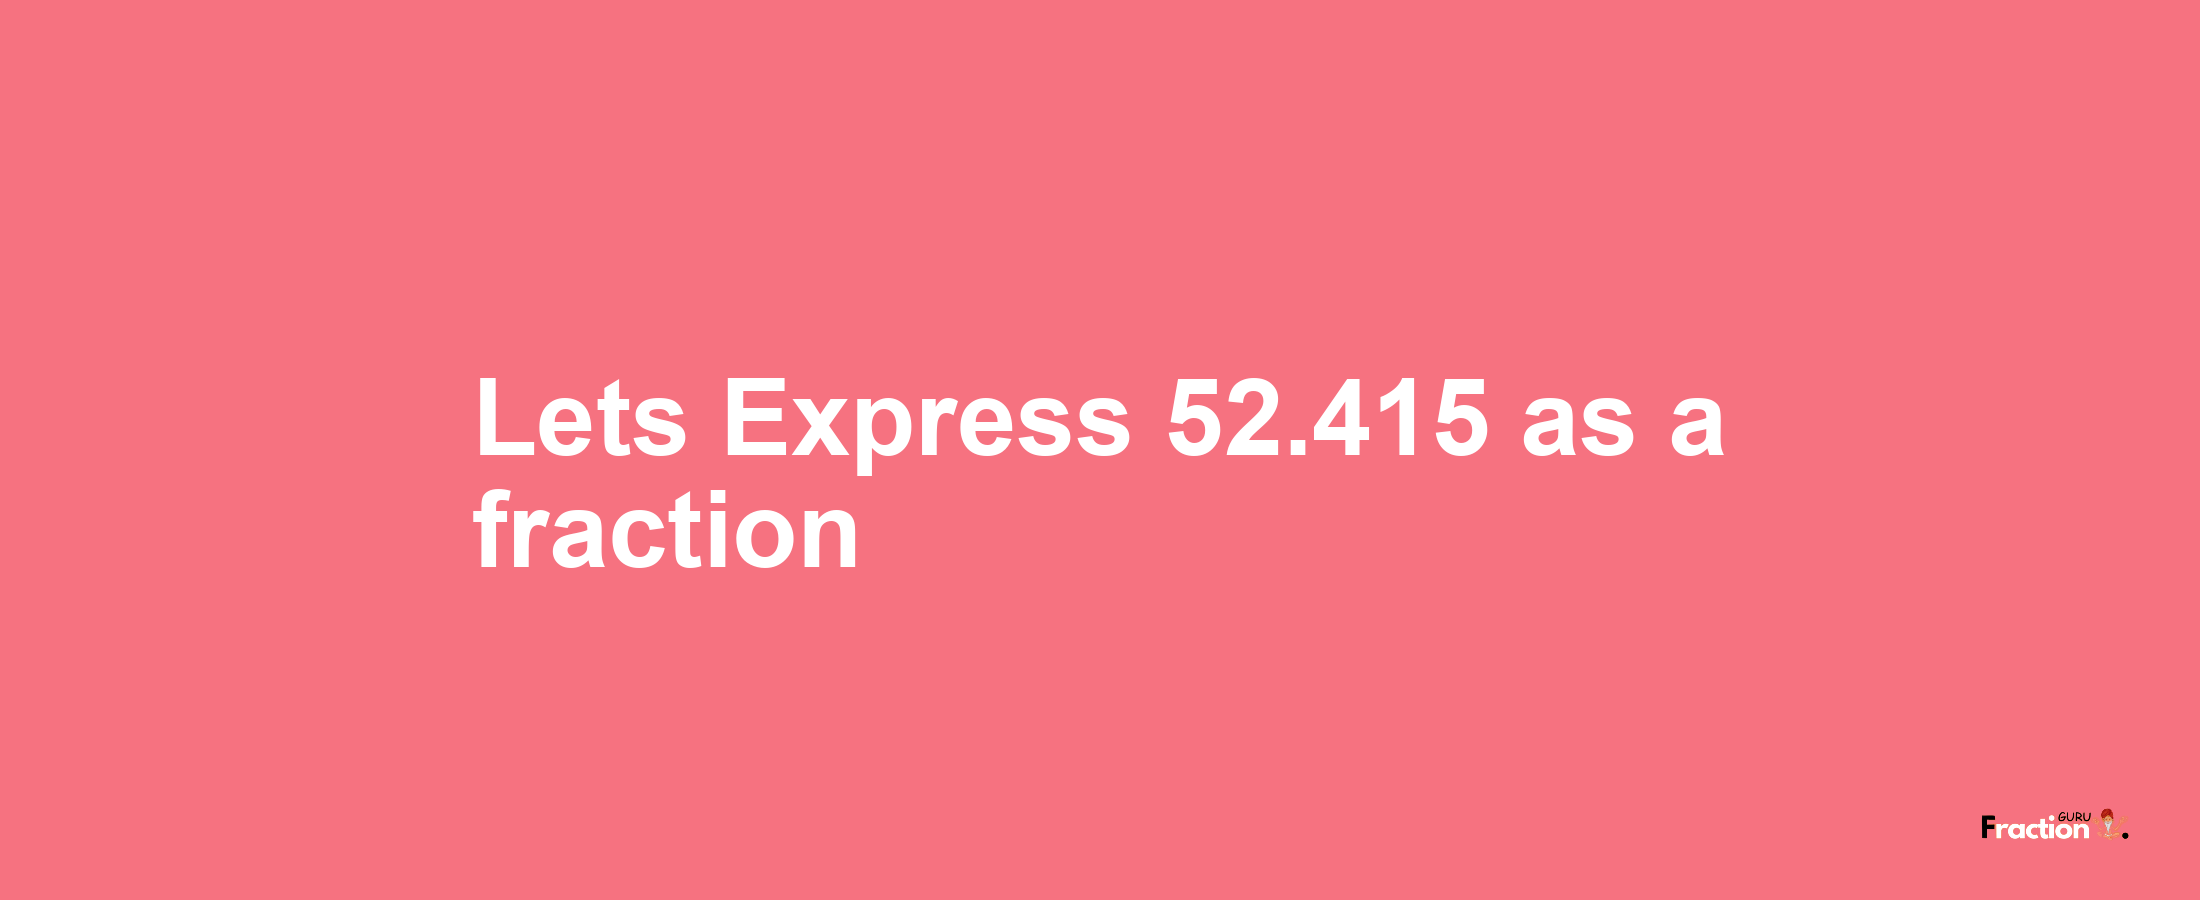 Lets Express 52.415 as afraction